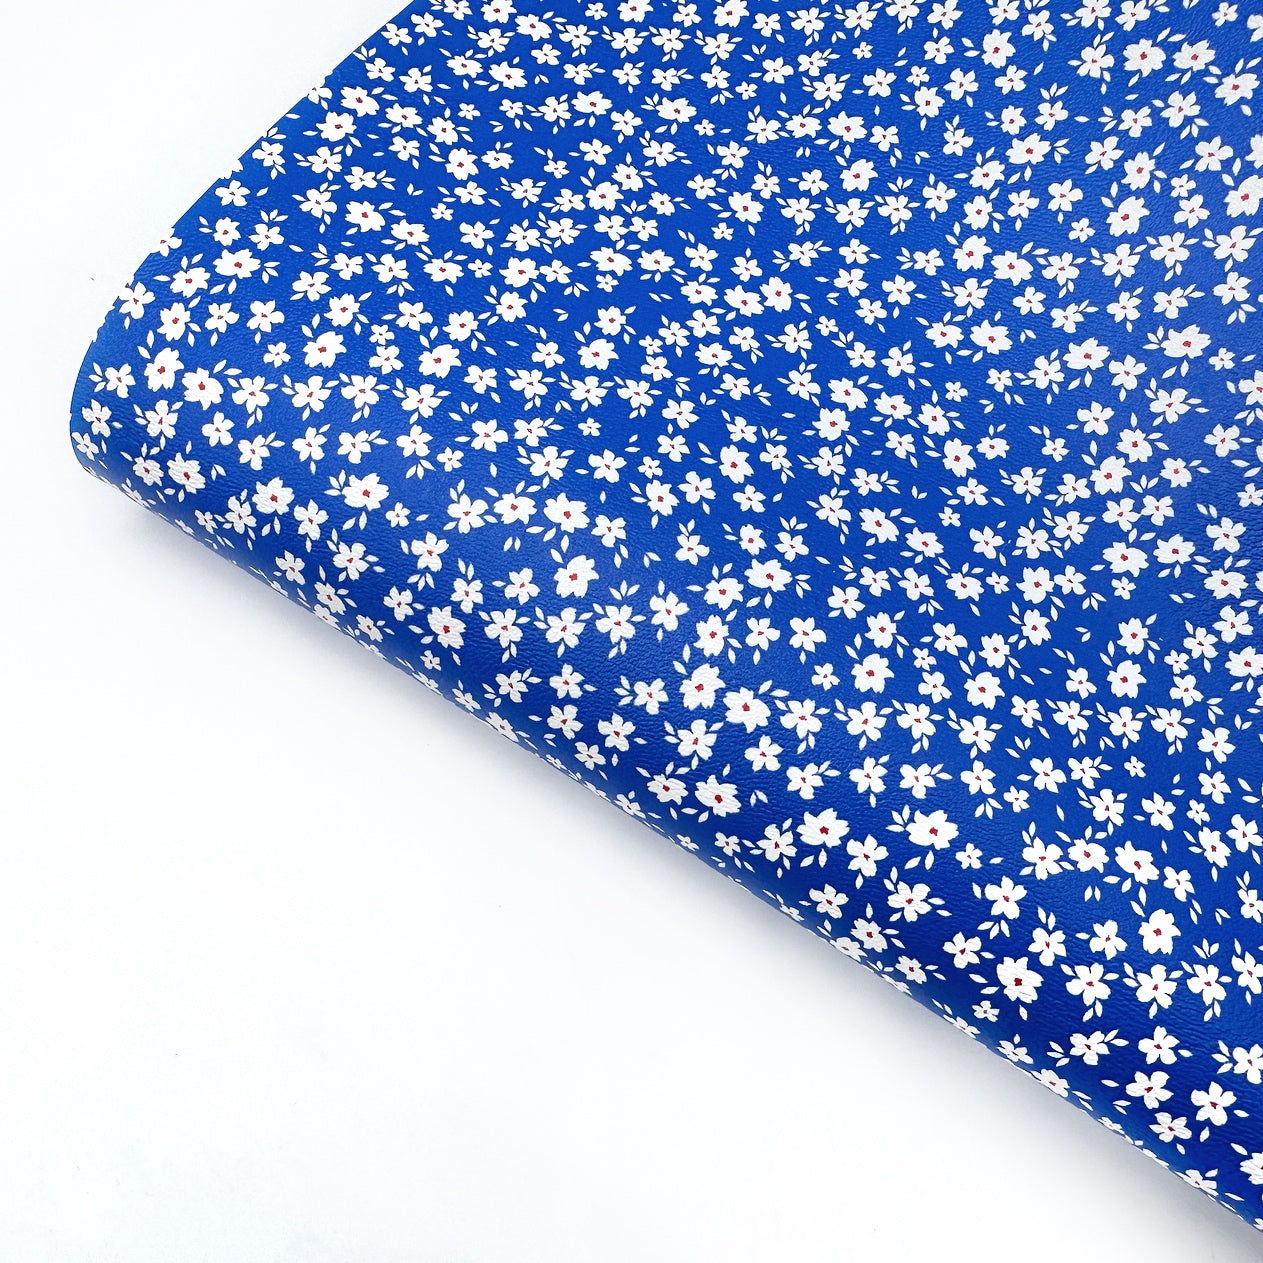 Forget me not Floral Premium Faux Leather Fabric Sheets